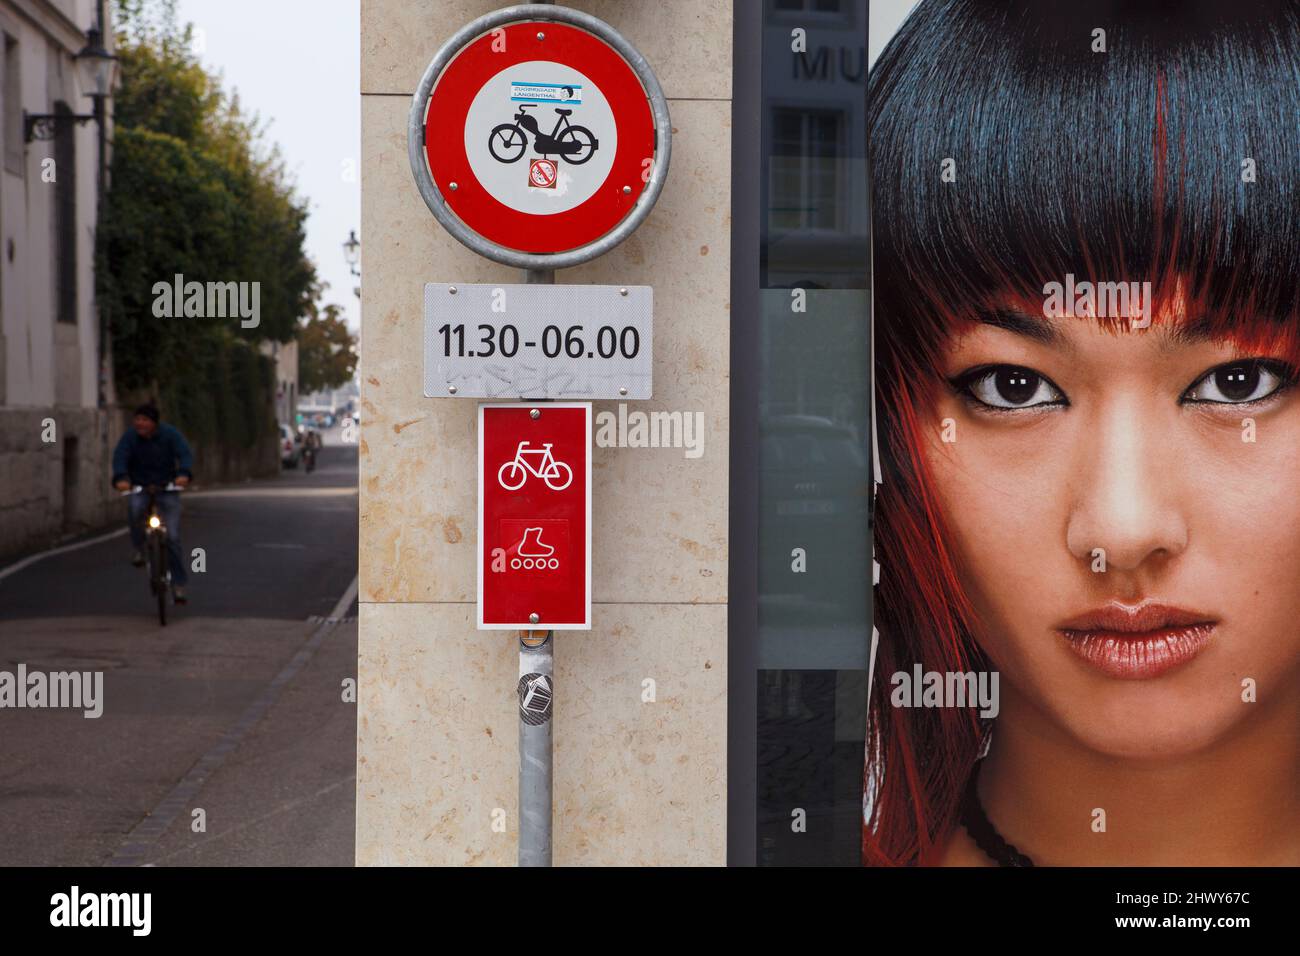 Cyclist related signage, a shopfront advertisement and a cyclist in a lane. Solothurn, Switzerland. Stock Photo